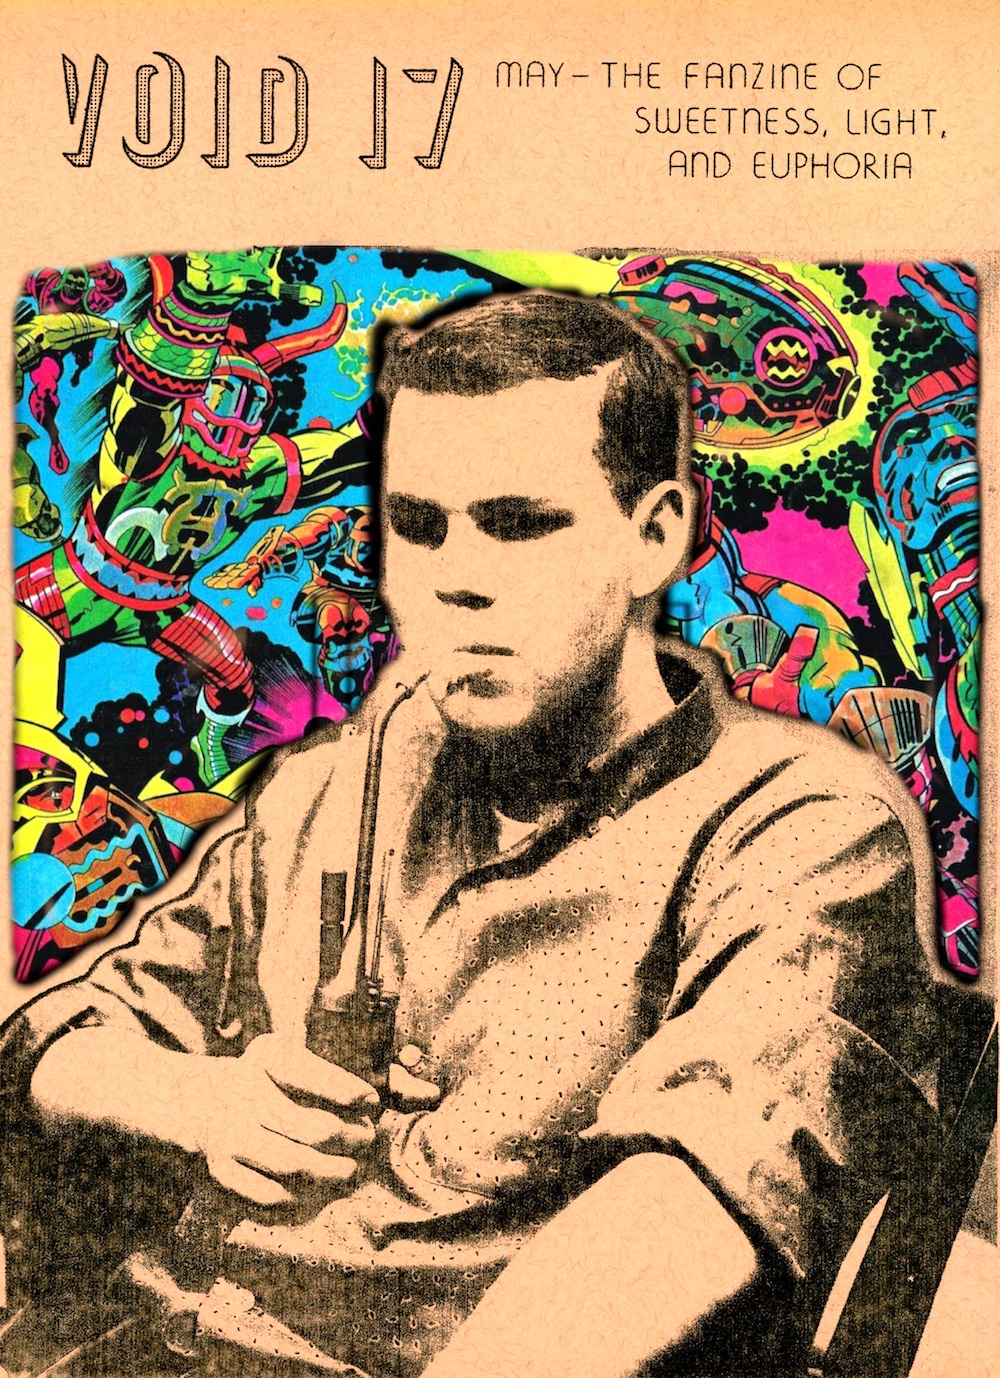 collage: Ted White's fanzine VOID #17, cover photo by Harry Lowinger, with Argo poster by Jack Kirby